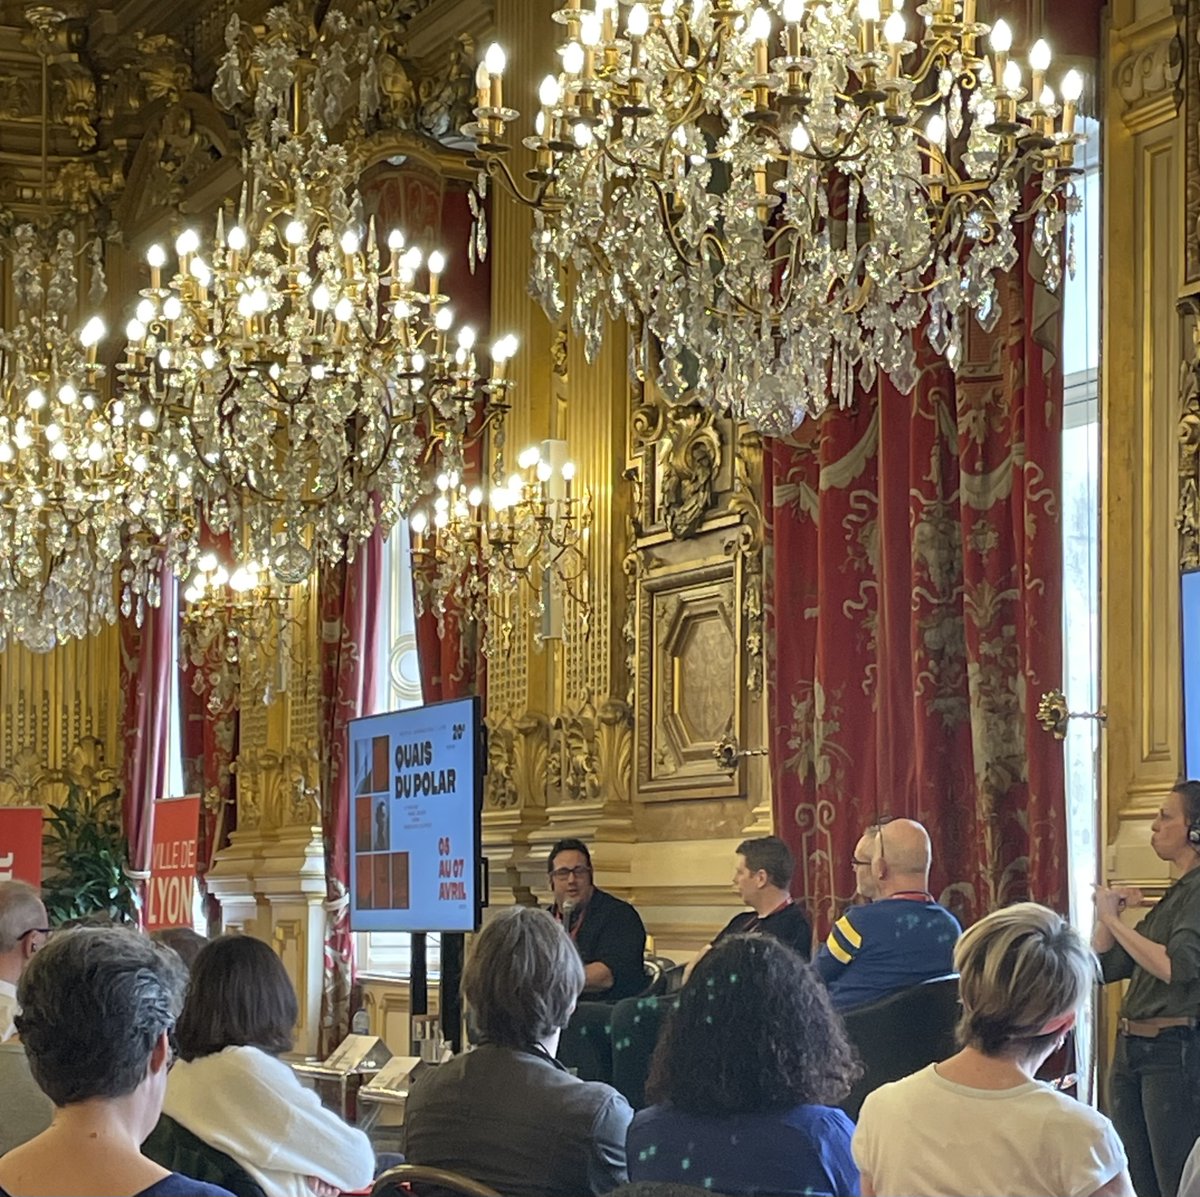 Also fun to work with @Gabino_Iglesias during his panel discussions at @Quaisdupolar at Lyon's understated city hall.